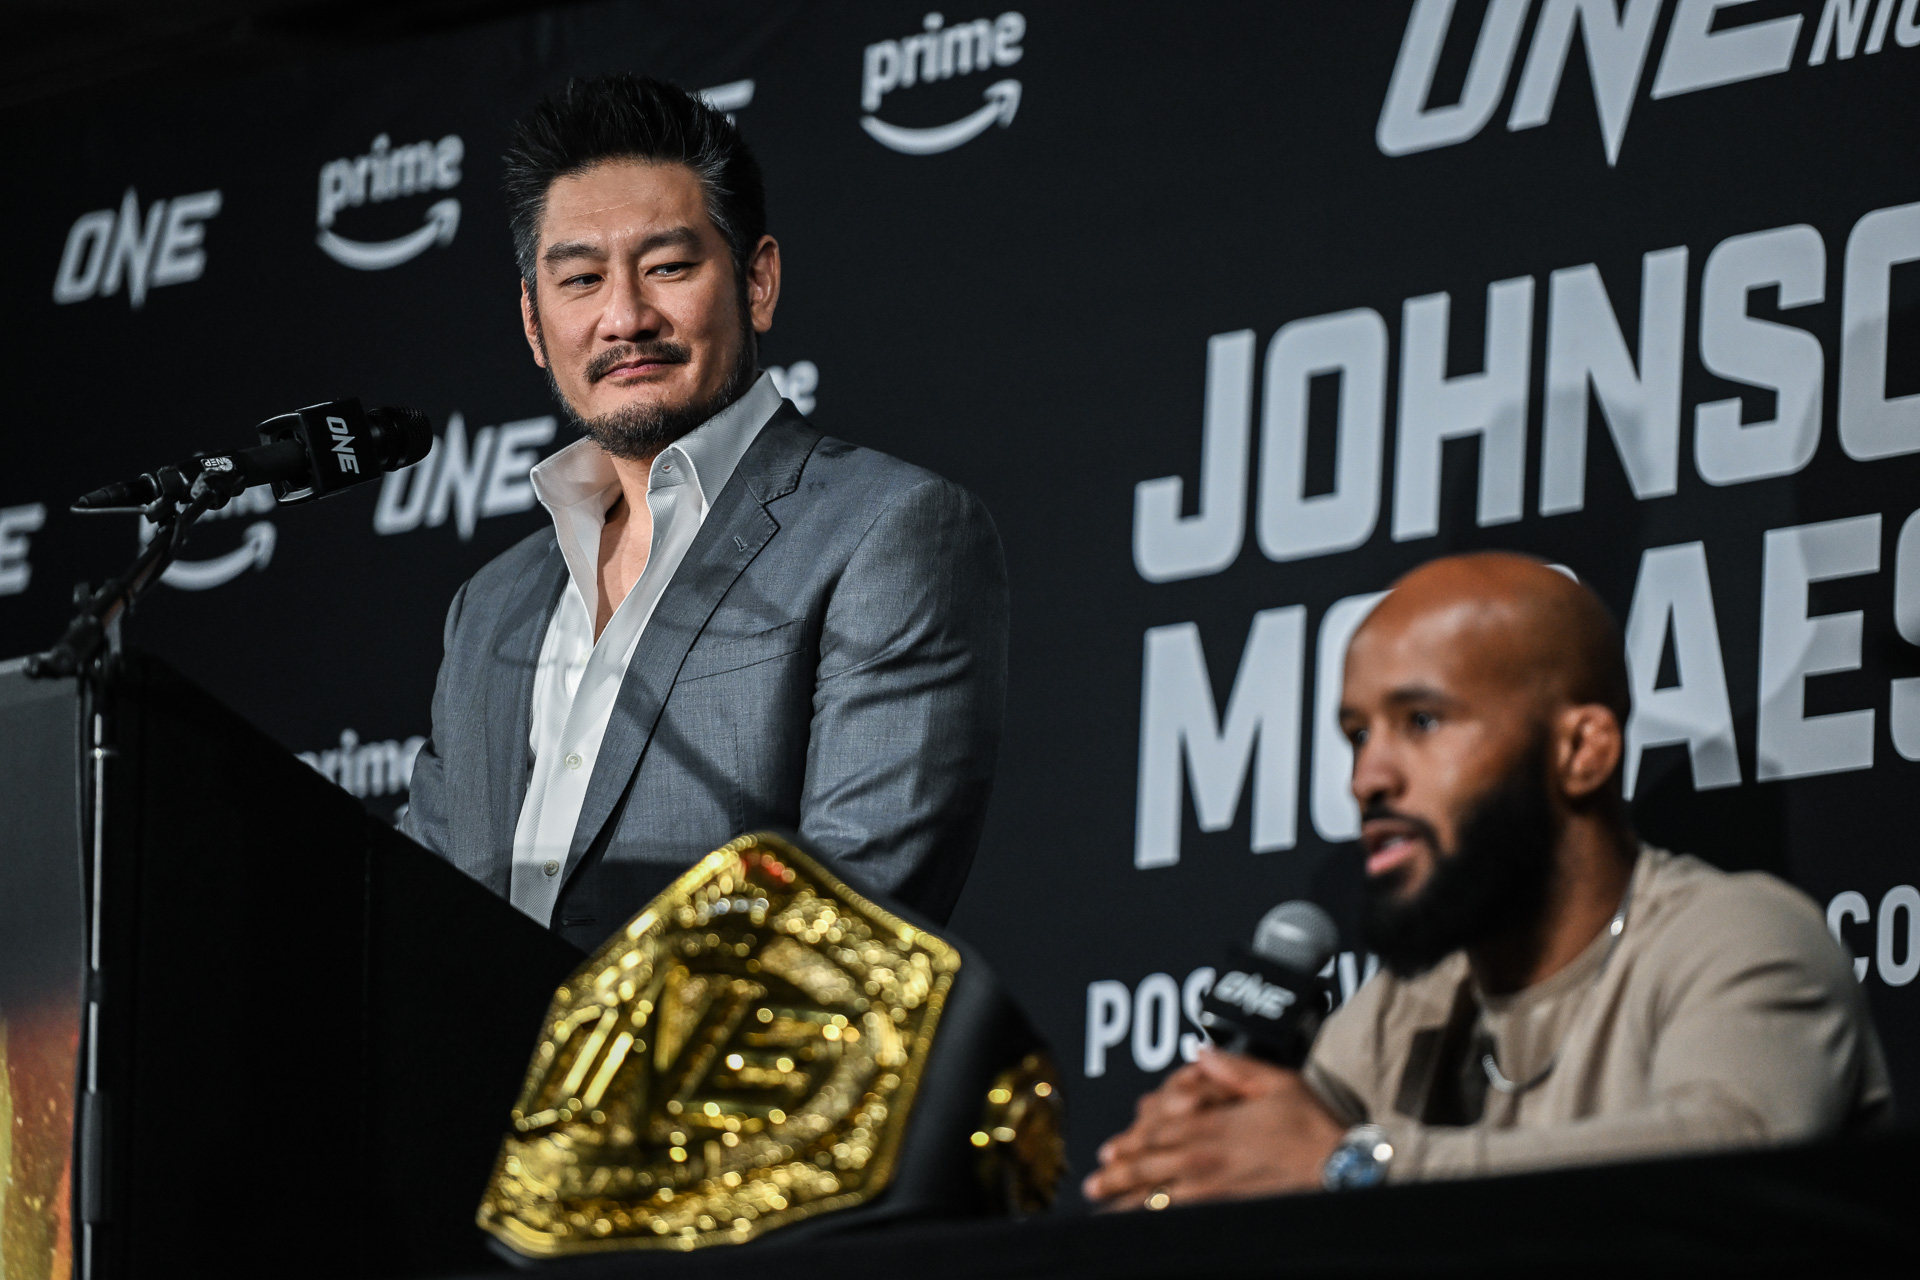 ONE chairman Chatri Sityodtong listens to Demetrious Johnson on stage at the Fight Night 10 post event press conference in Denver. Photos: ONE Championship 